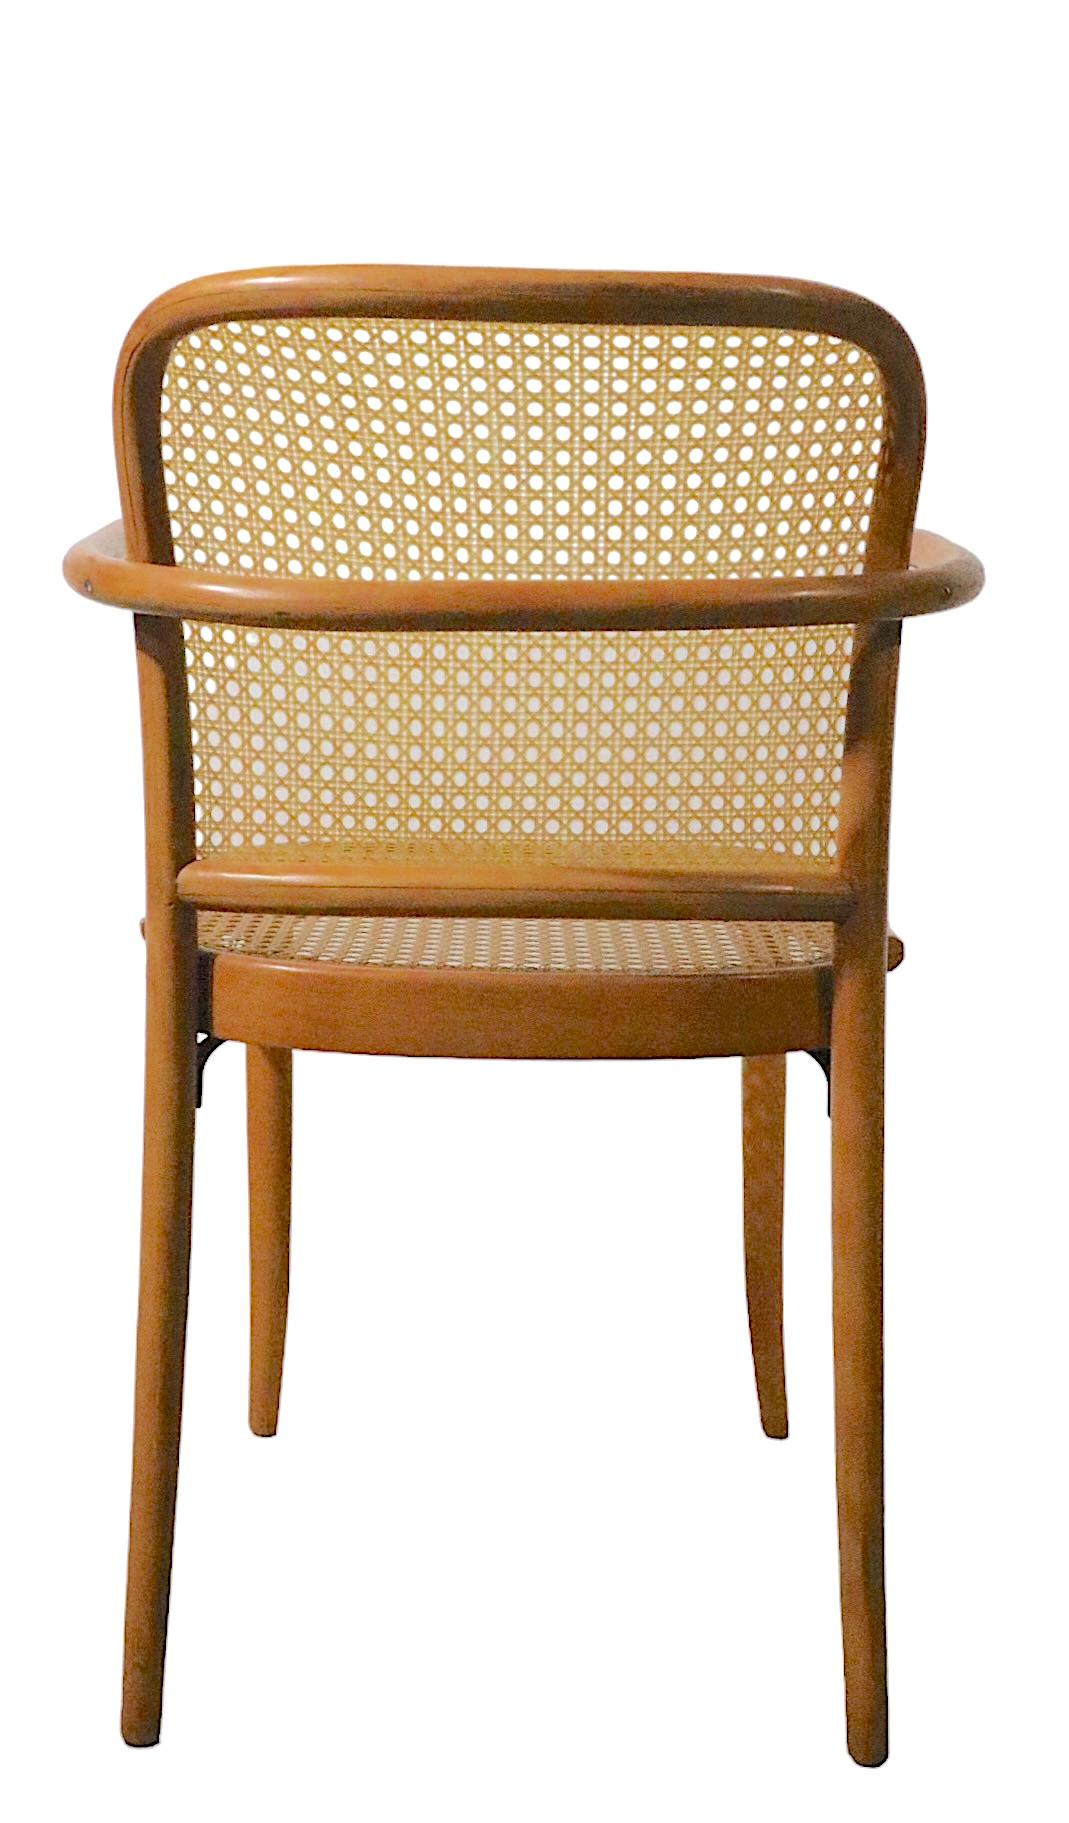 Set of 5 Josef Frank Prague Chairs Made in Czechoslovakia, circa 1970s For Sale 5